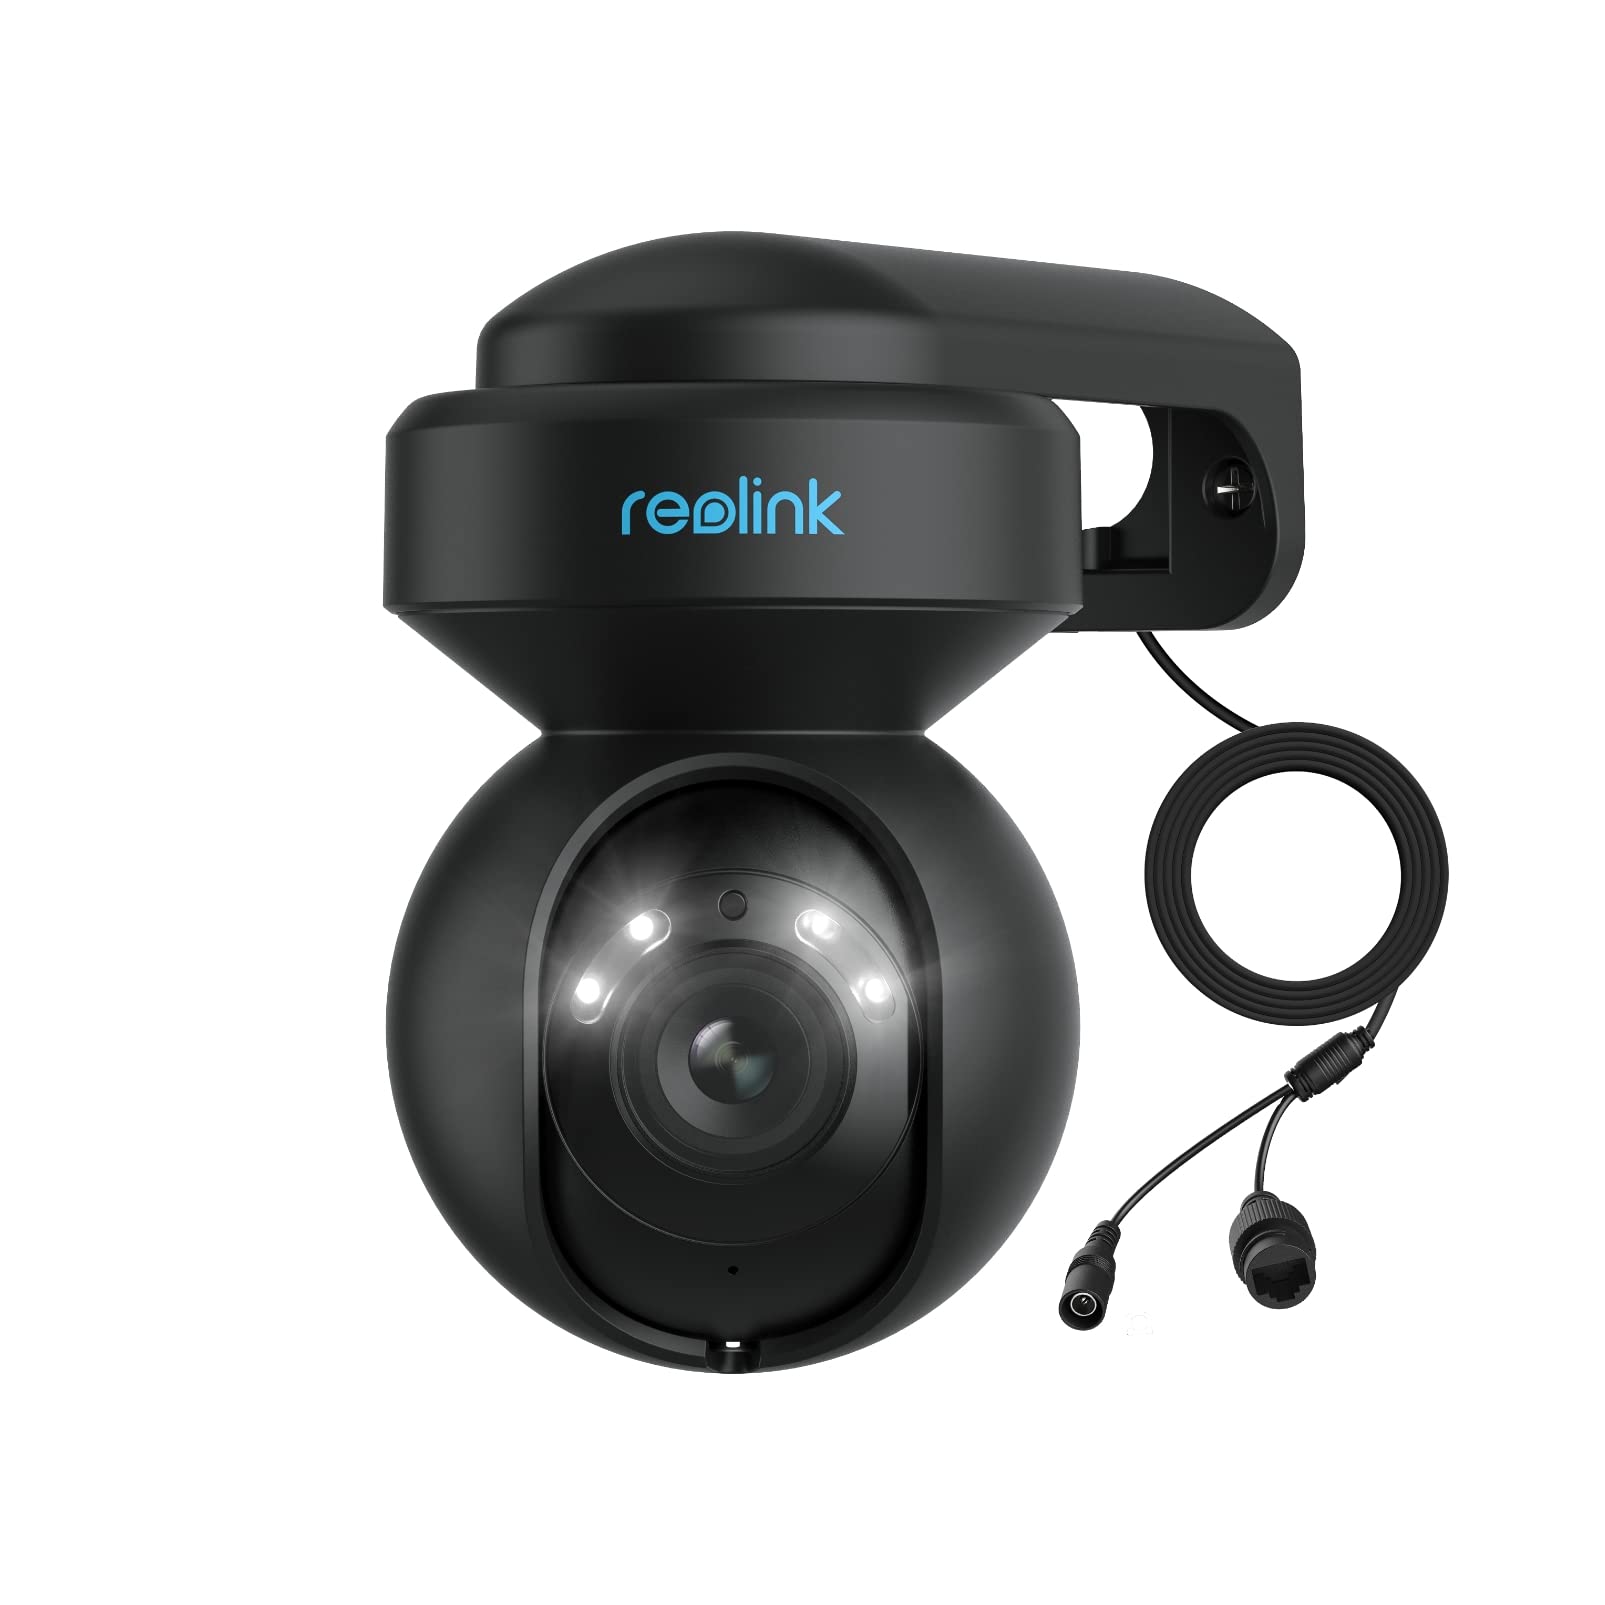 REOLINK PTZ Camera Outdoor 5MP HD WiFi Camera for Home Security 2.45 GHz WiFi Auto Tracking 3X Optical Zoom Smart Perso